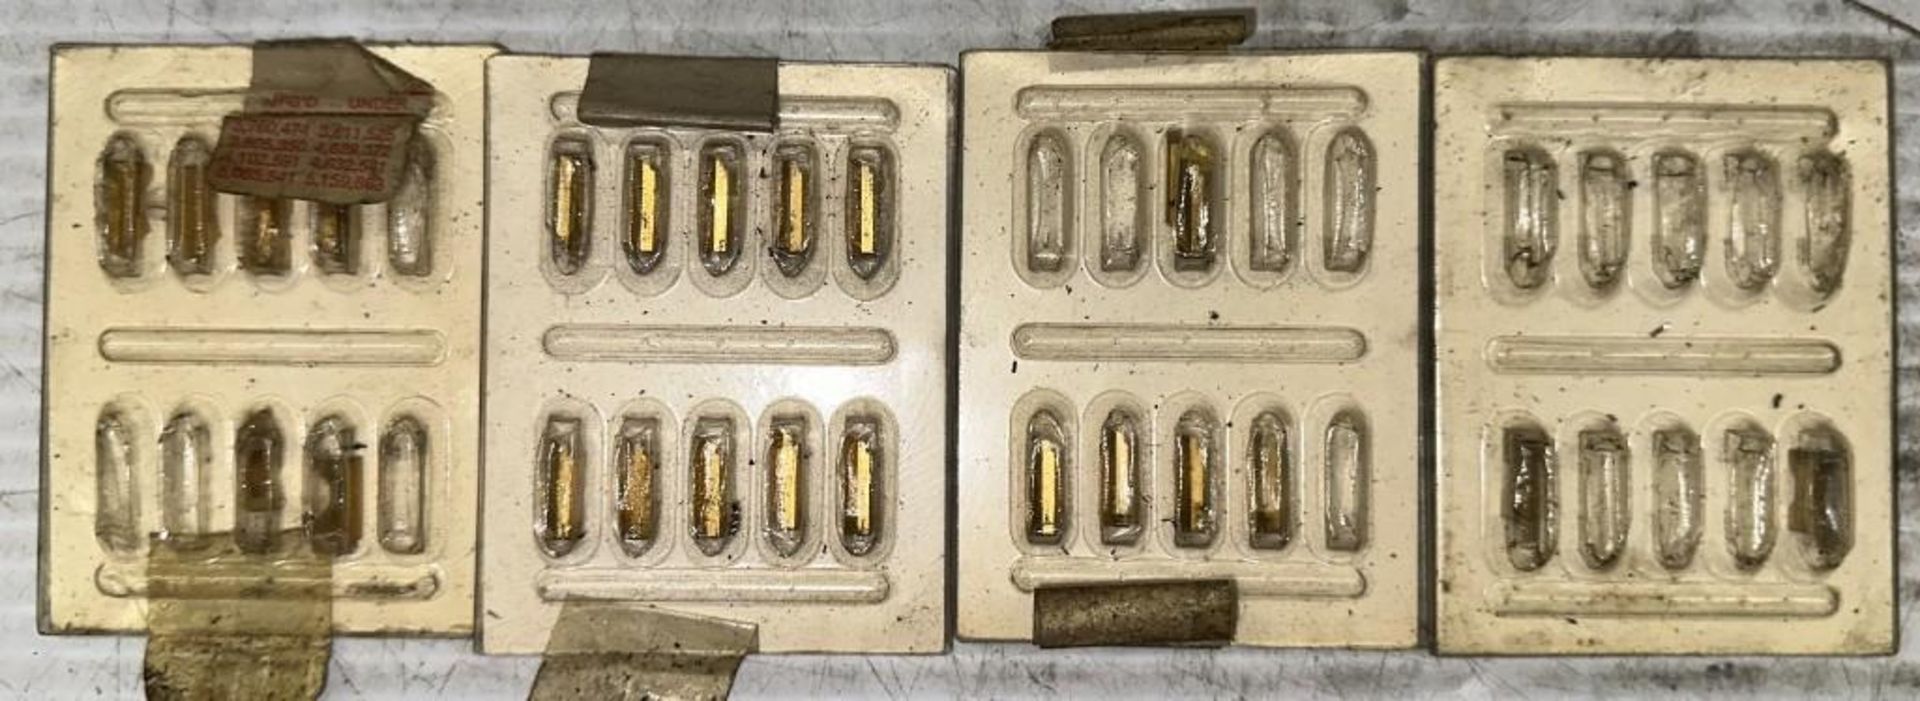 Lot of Manchester #510-113-36 Carbide Inserts